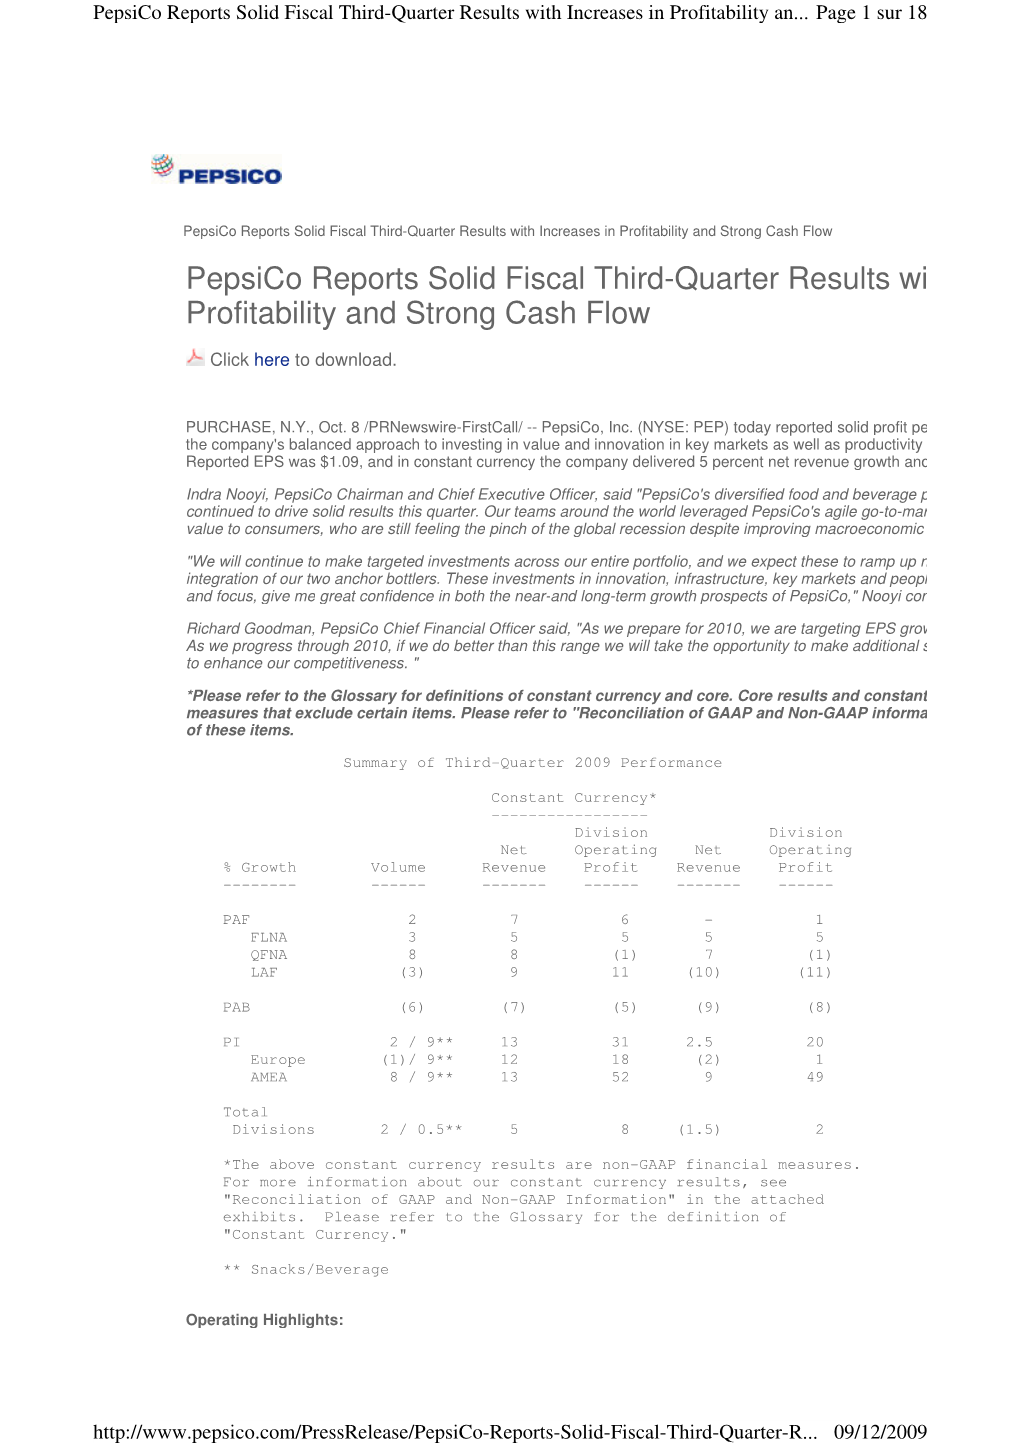 Pepsico Reports Solid Fiscal Third-Quarter Results With